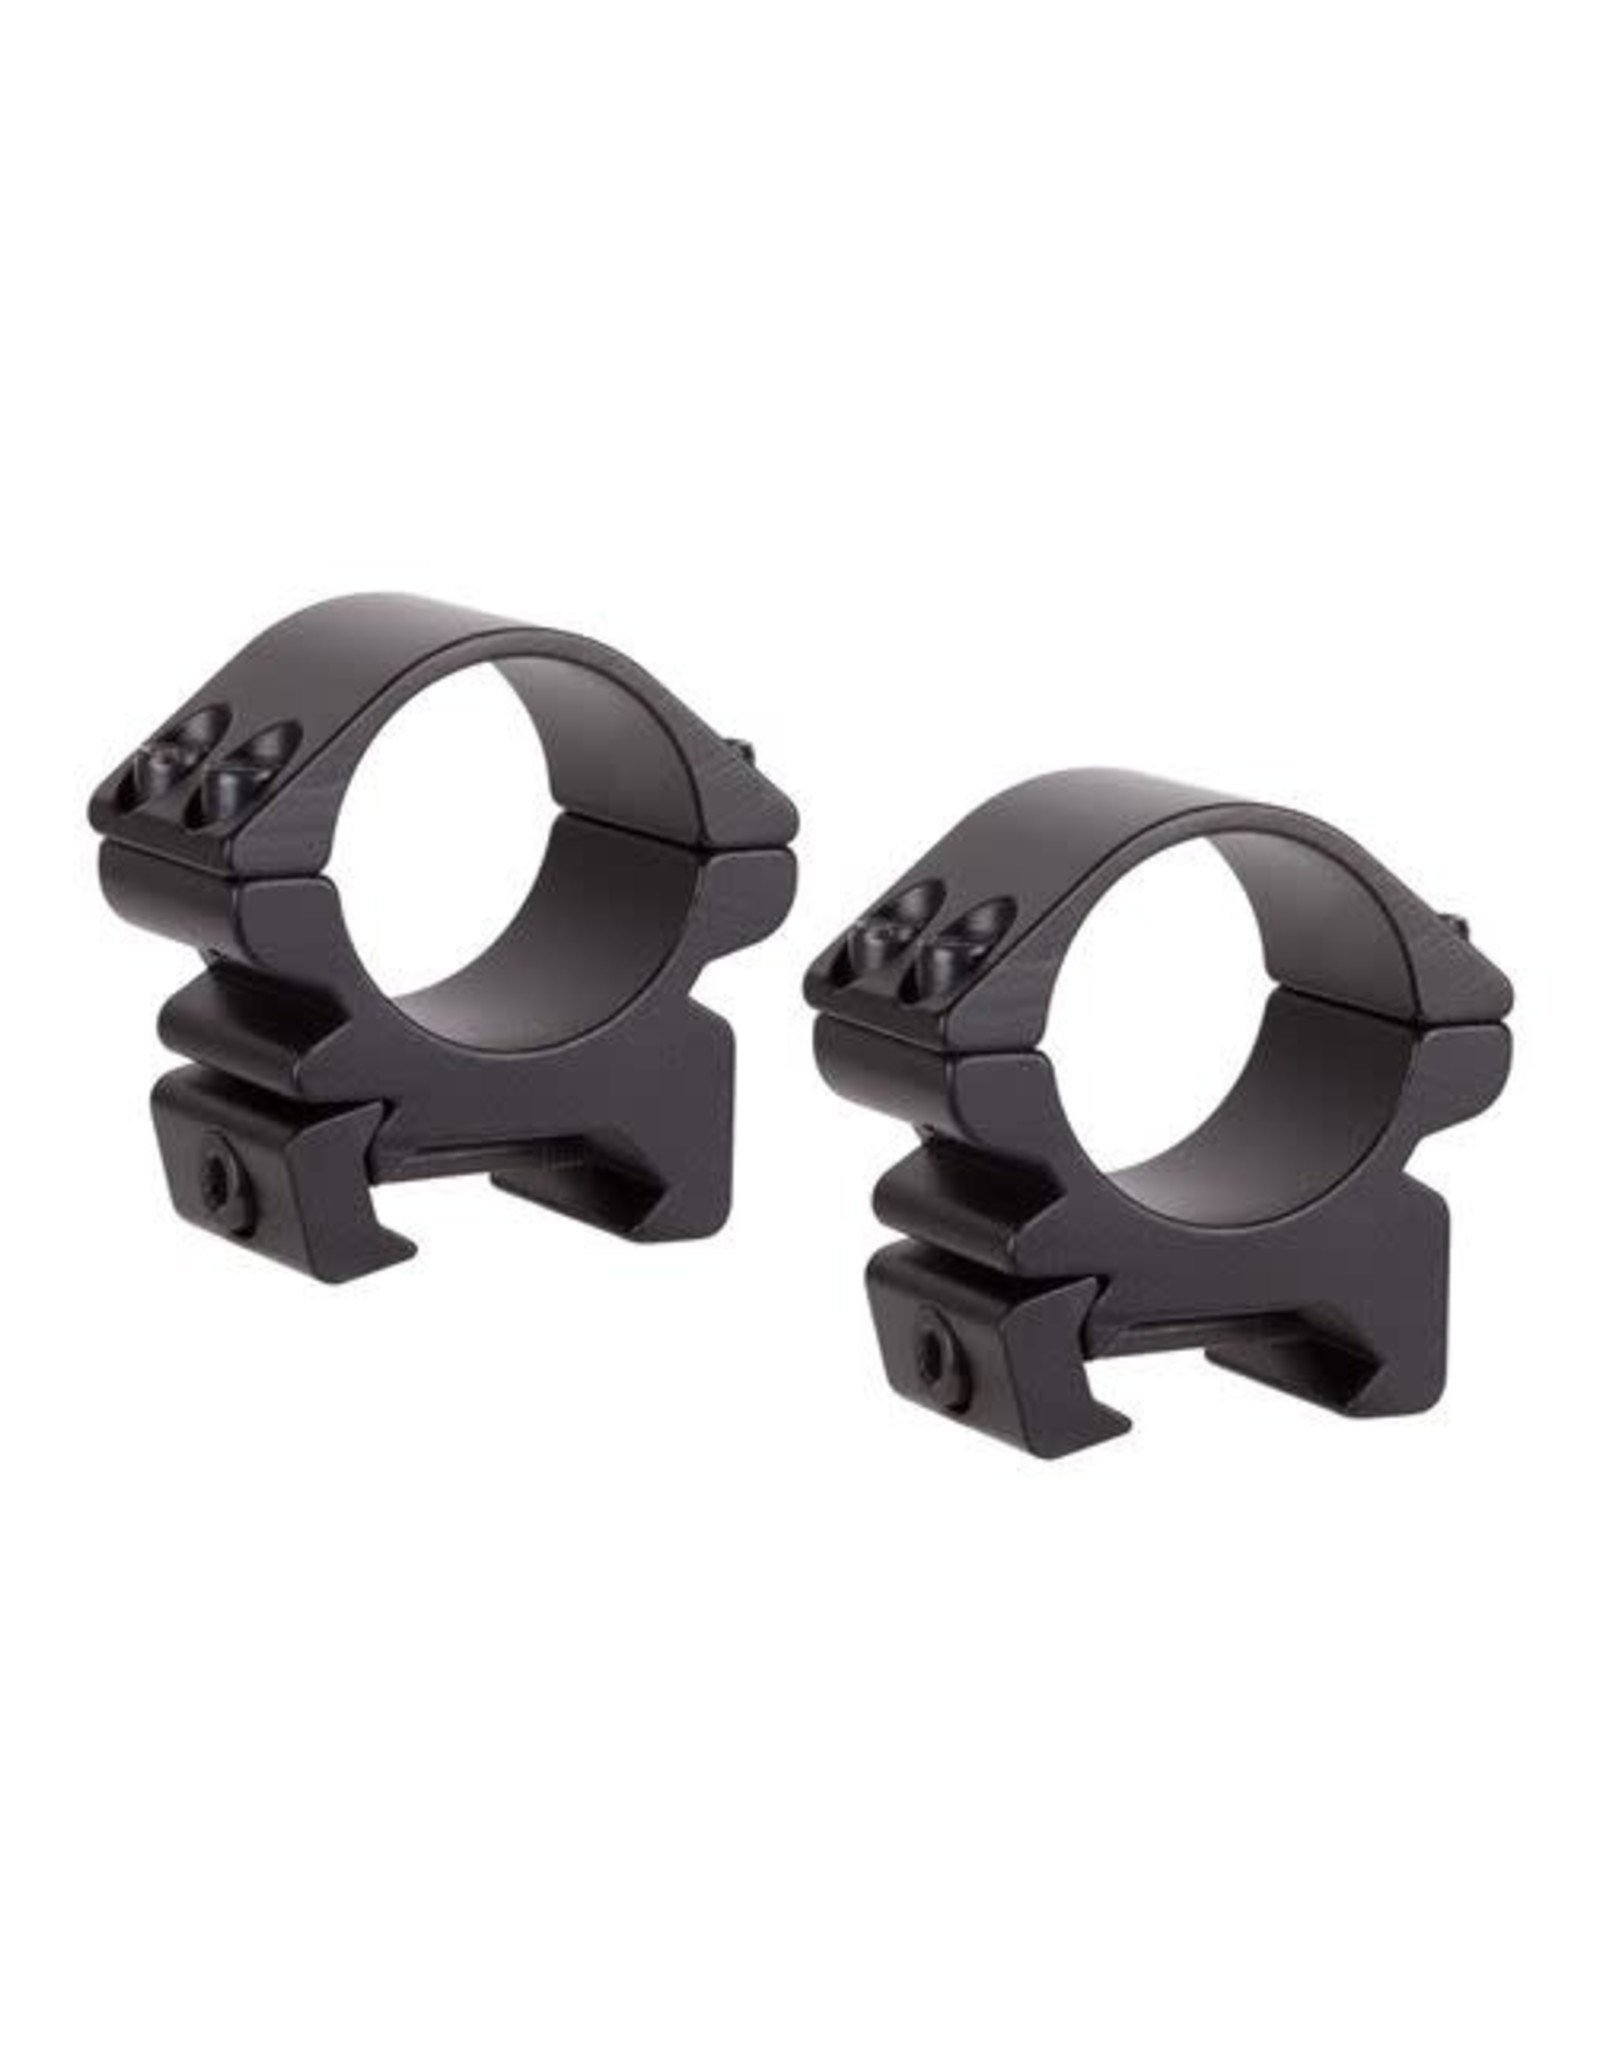 CenterPoint CenterPoint 1" Low Profile Weaver Mount Rings